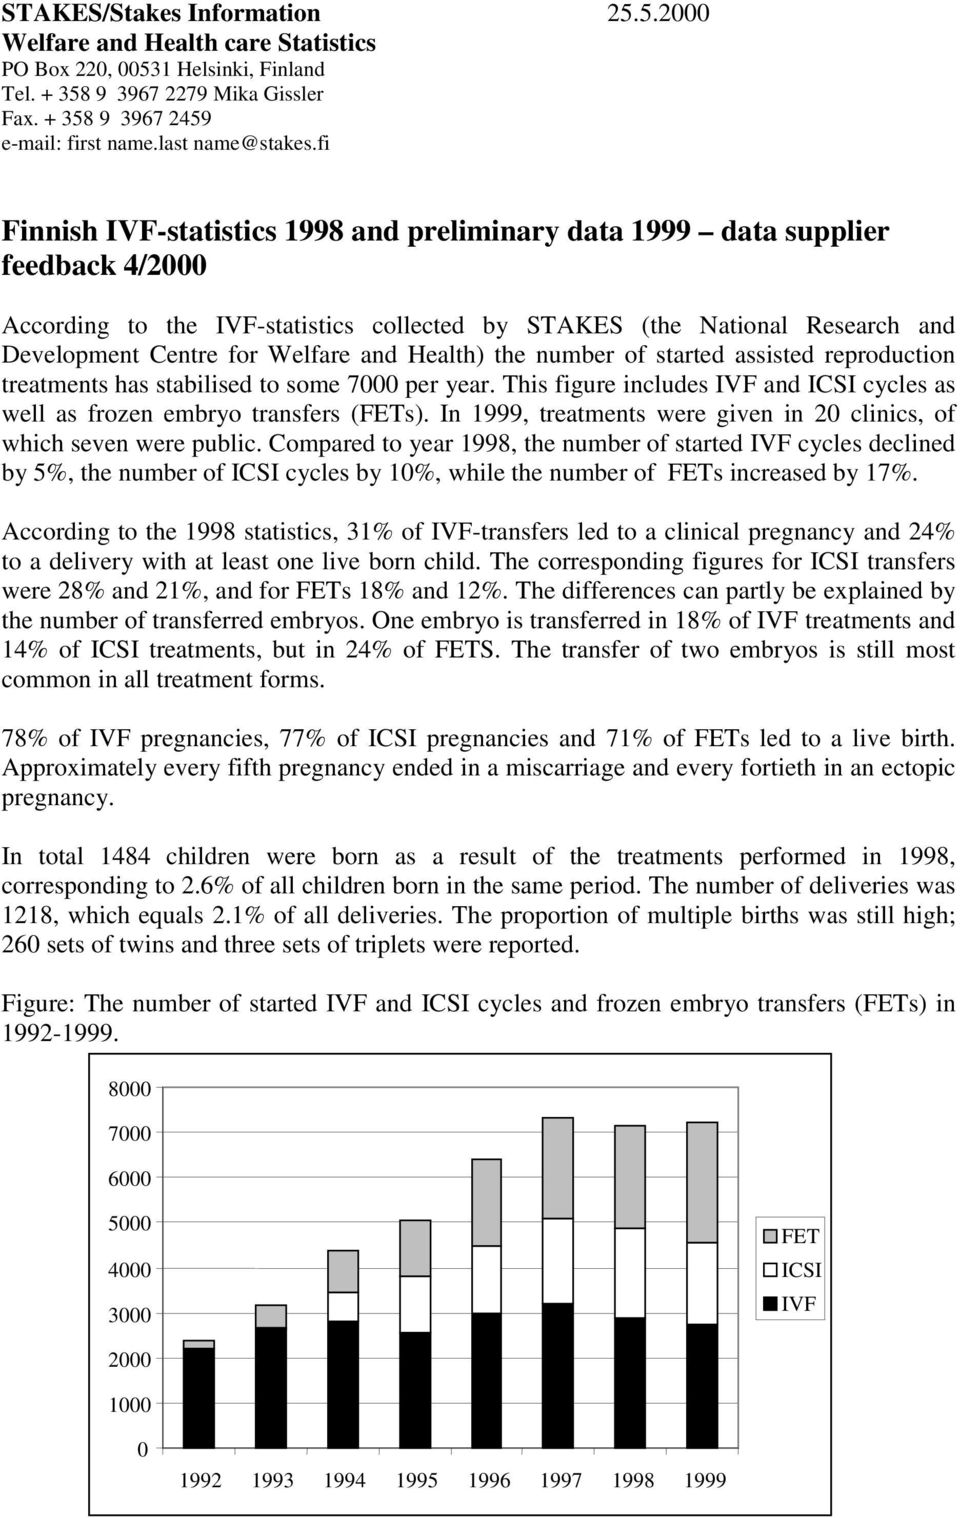 fi Finnish IVF-statistics 1998 and preliminary data 1999 data supplier feedback 4/2000 According to the IVF-statistics collected by STAKES (the National Research and Development Centre for Welfare